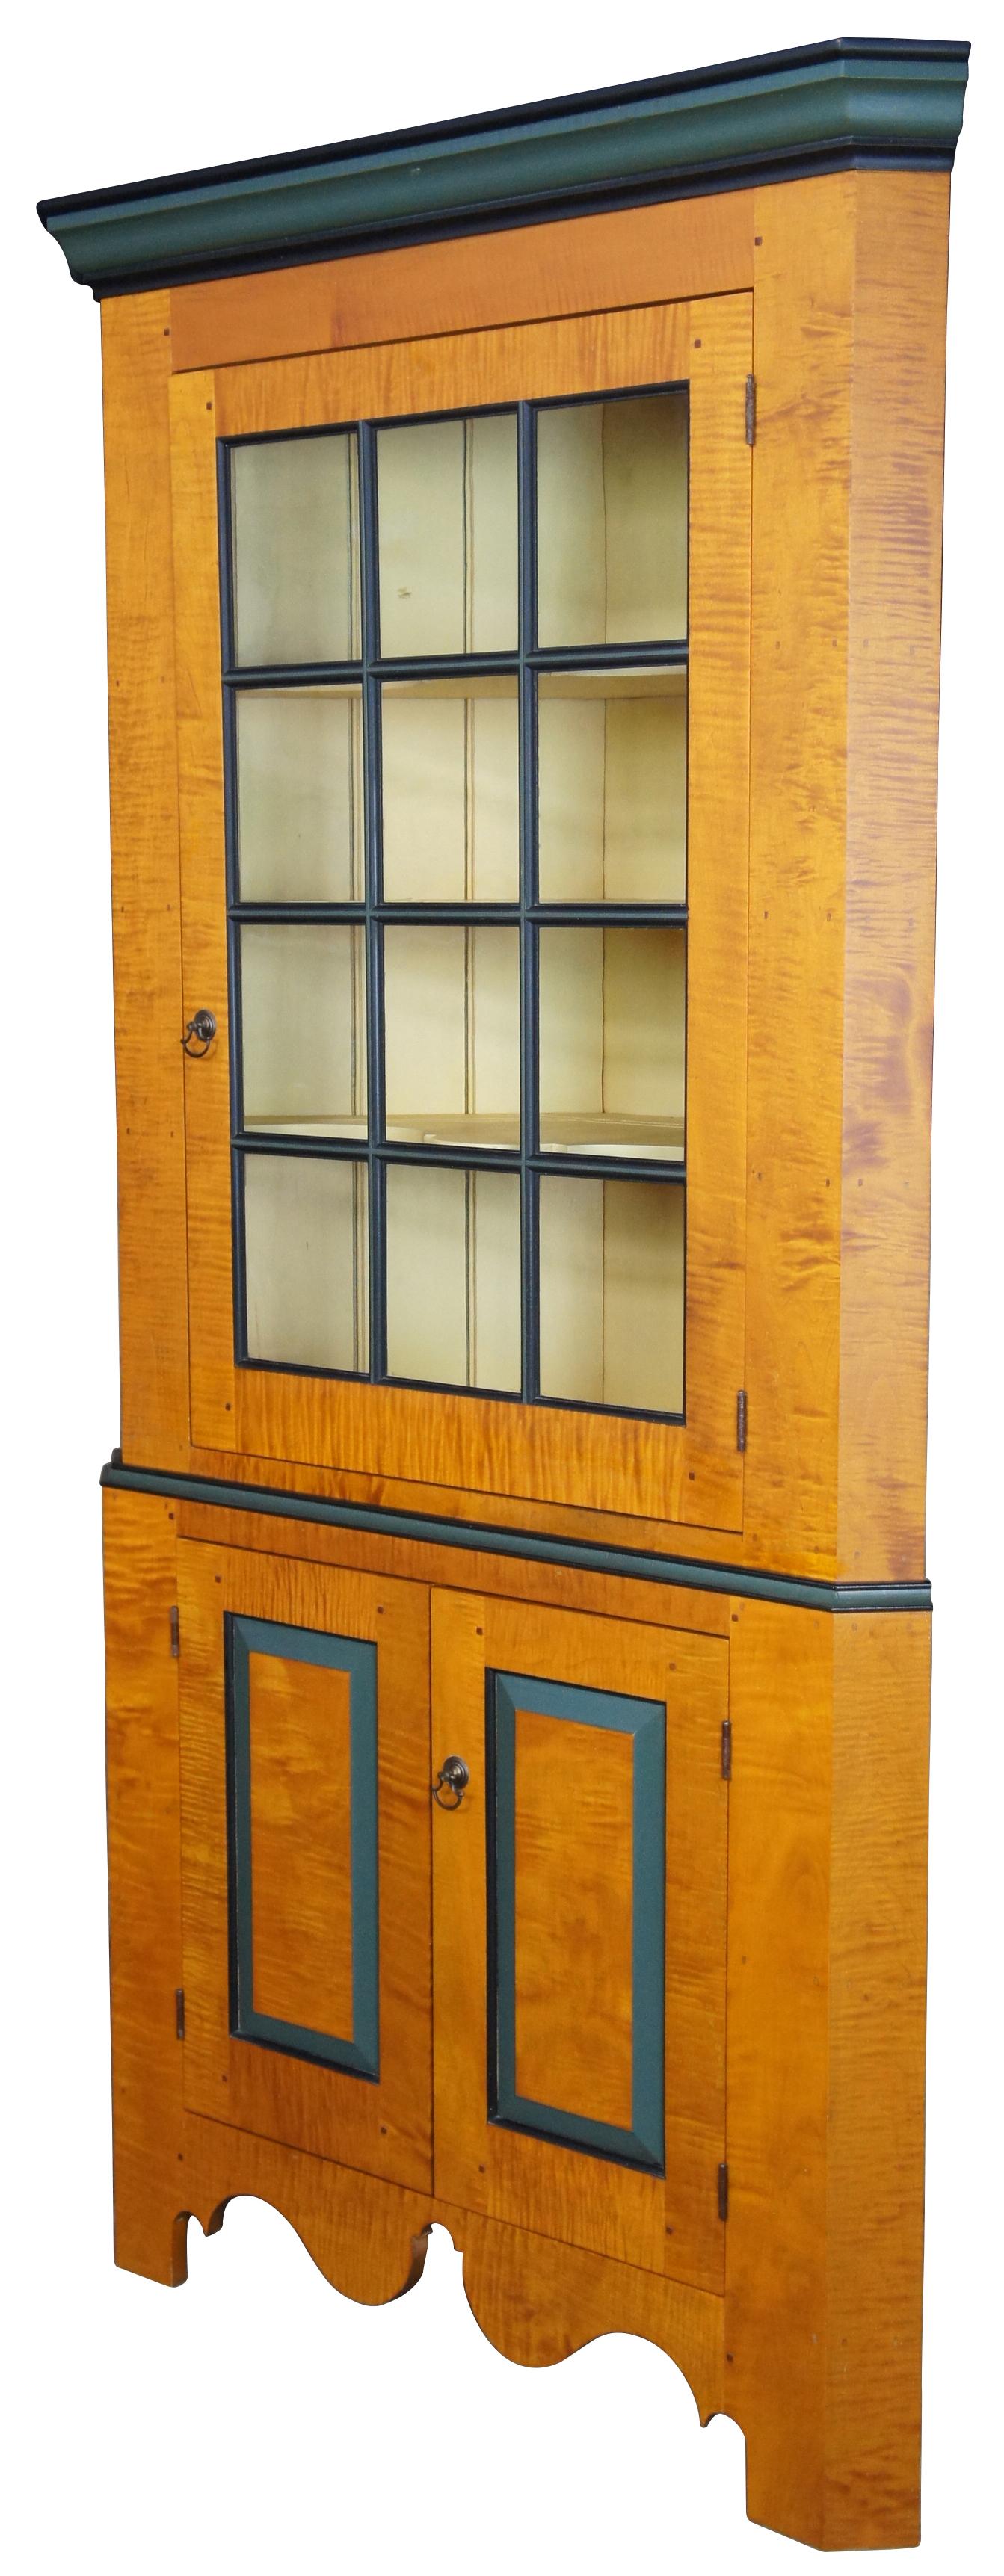 Curly maple corner cupboard by David T Smith, American, late 20th century. Constructed of curly maple with dark green trim, featuring four painted shelves in the upper eight paned glass cabinet and two shelves in the lower cabinet.

Measures: